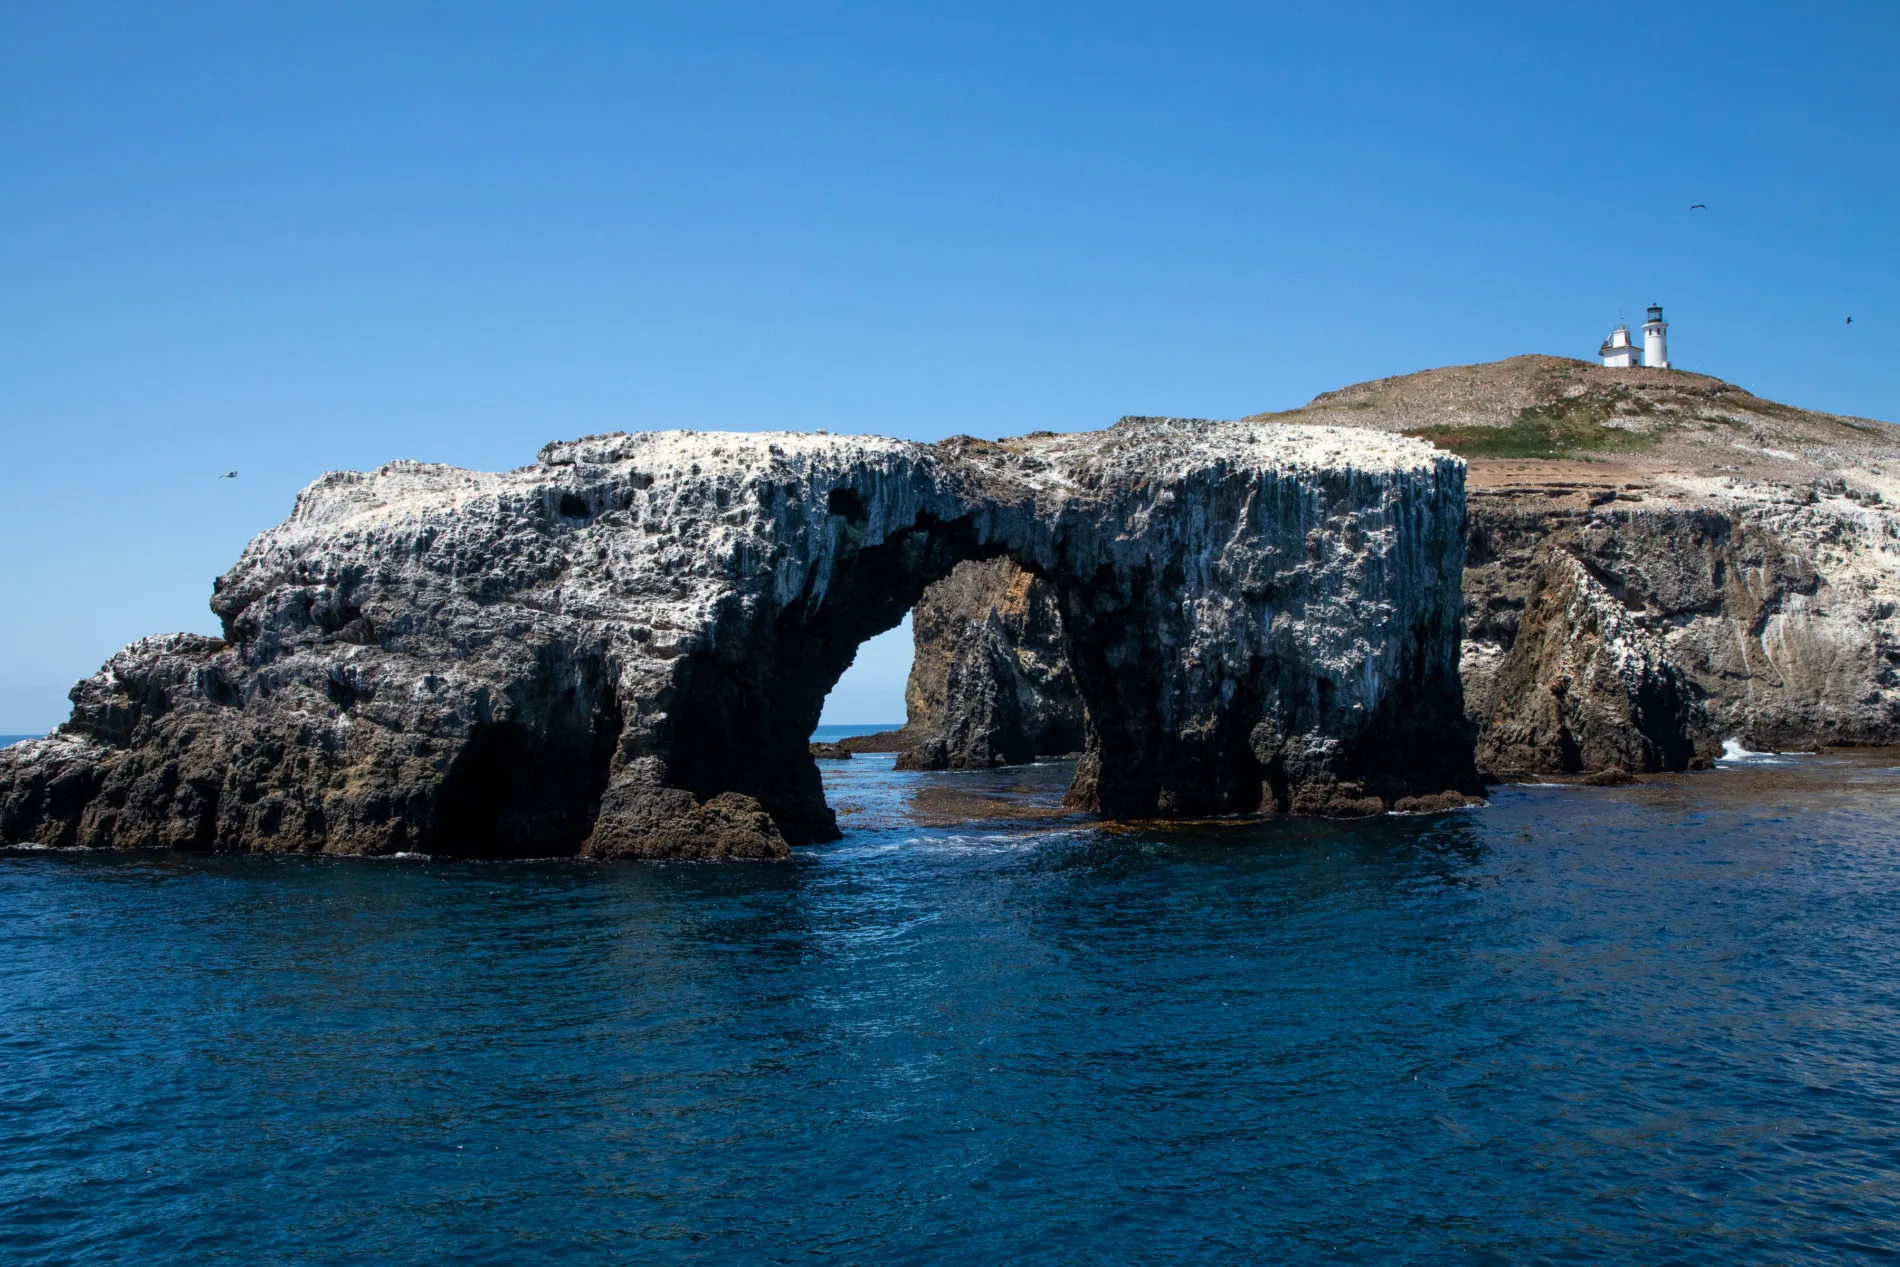 The Channel Islands National Park is only about an hour off of the I-5, and is an iconic spot to visit in California.